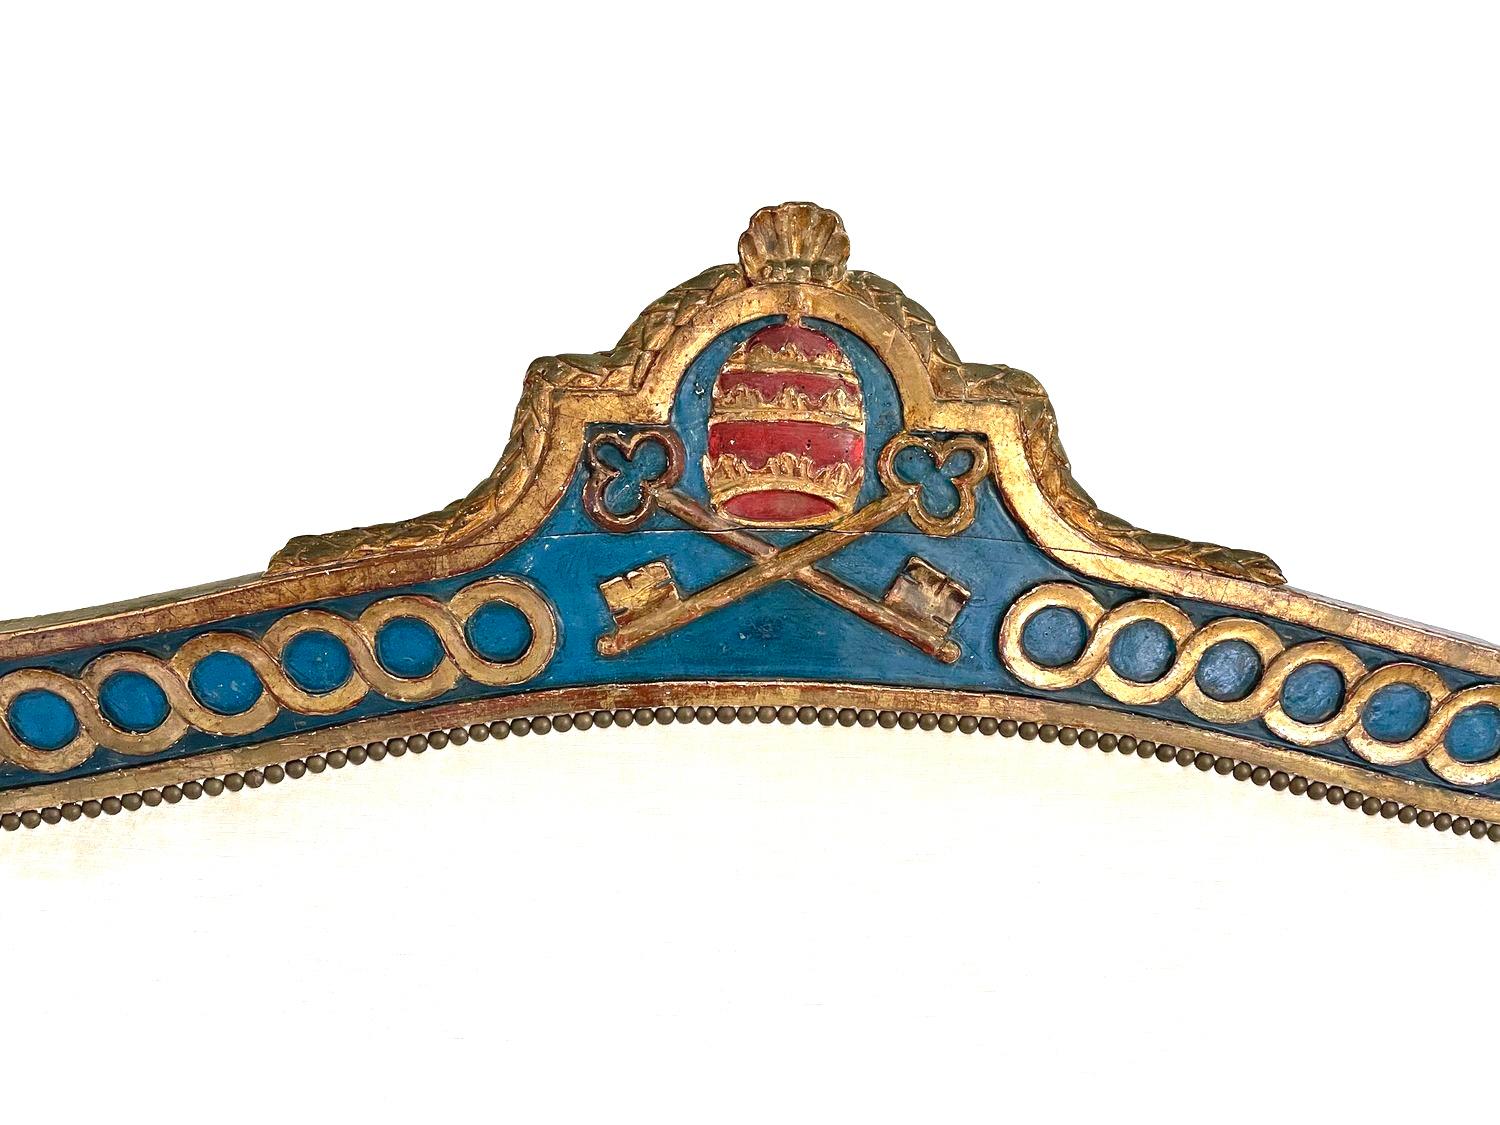 An extremely rare neoclassical parcel-gilt and painted banquette in the transitional Louis XV/XVI style, likely from Marche, Italy, circa 1790, carved on the back rail with the Papal crest depicting crossed keys beneath three gold crowns on a red